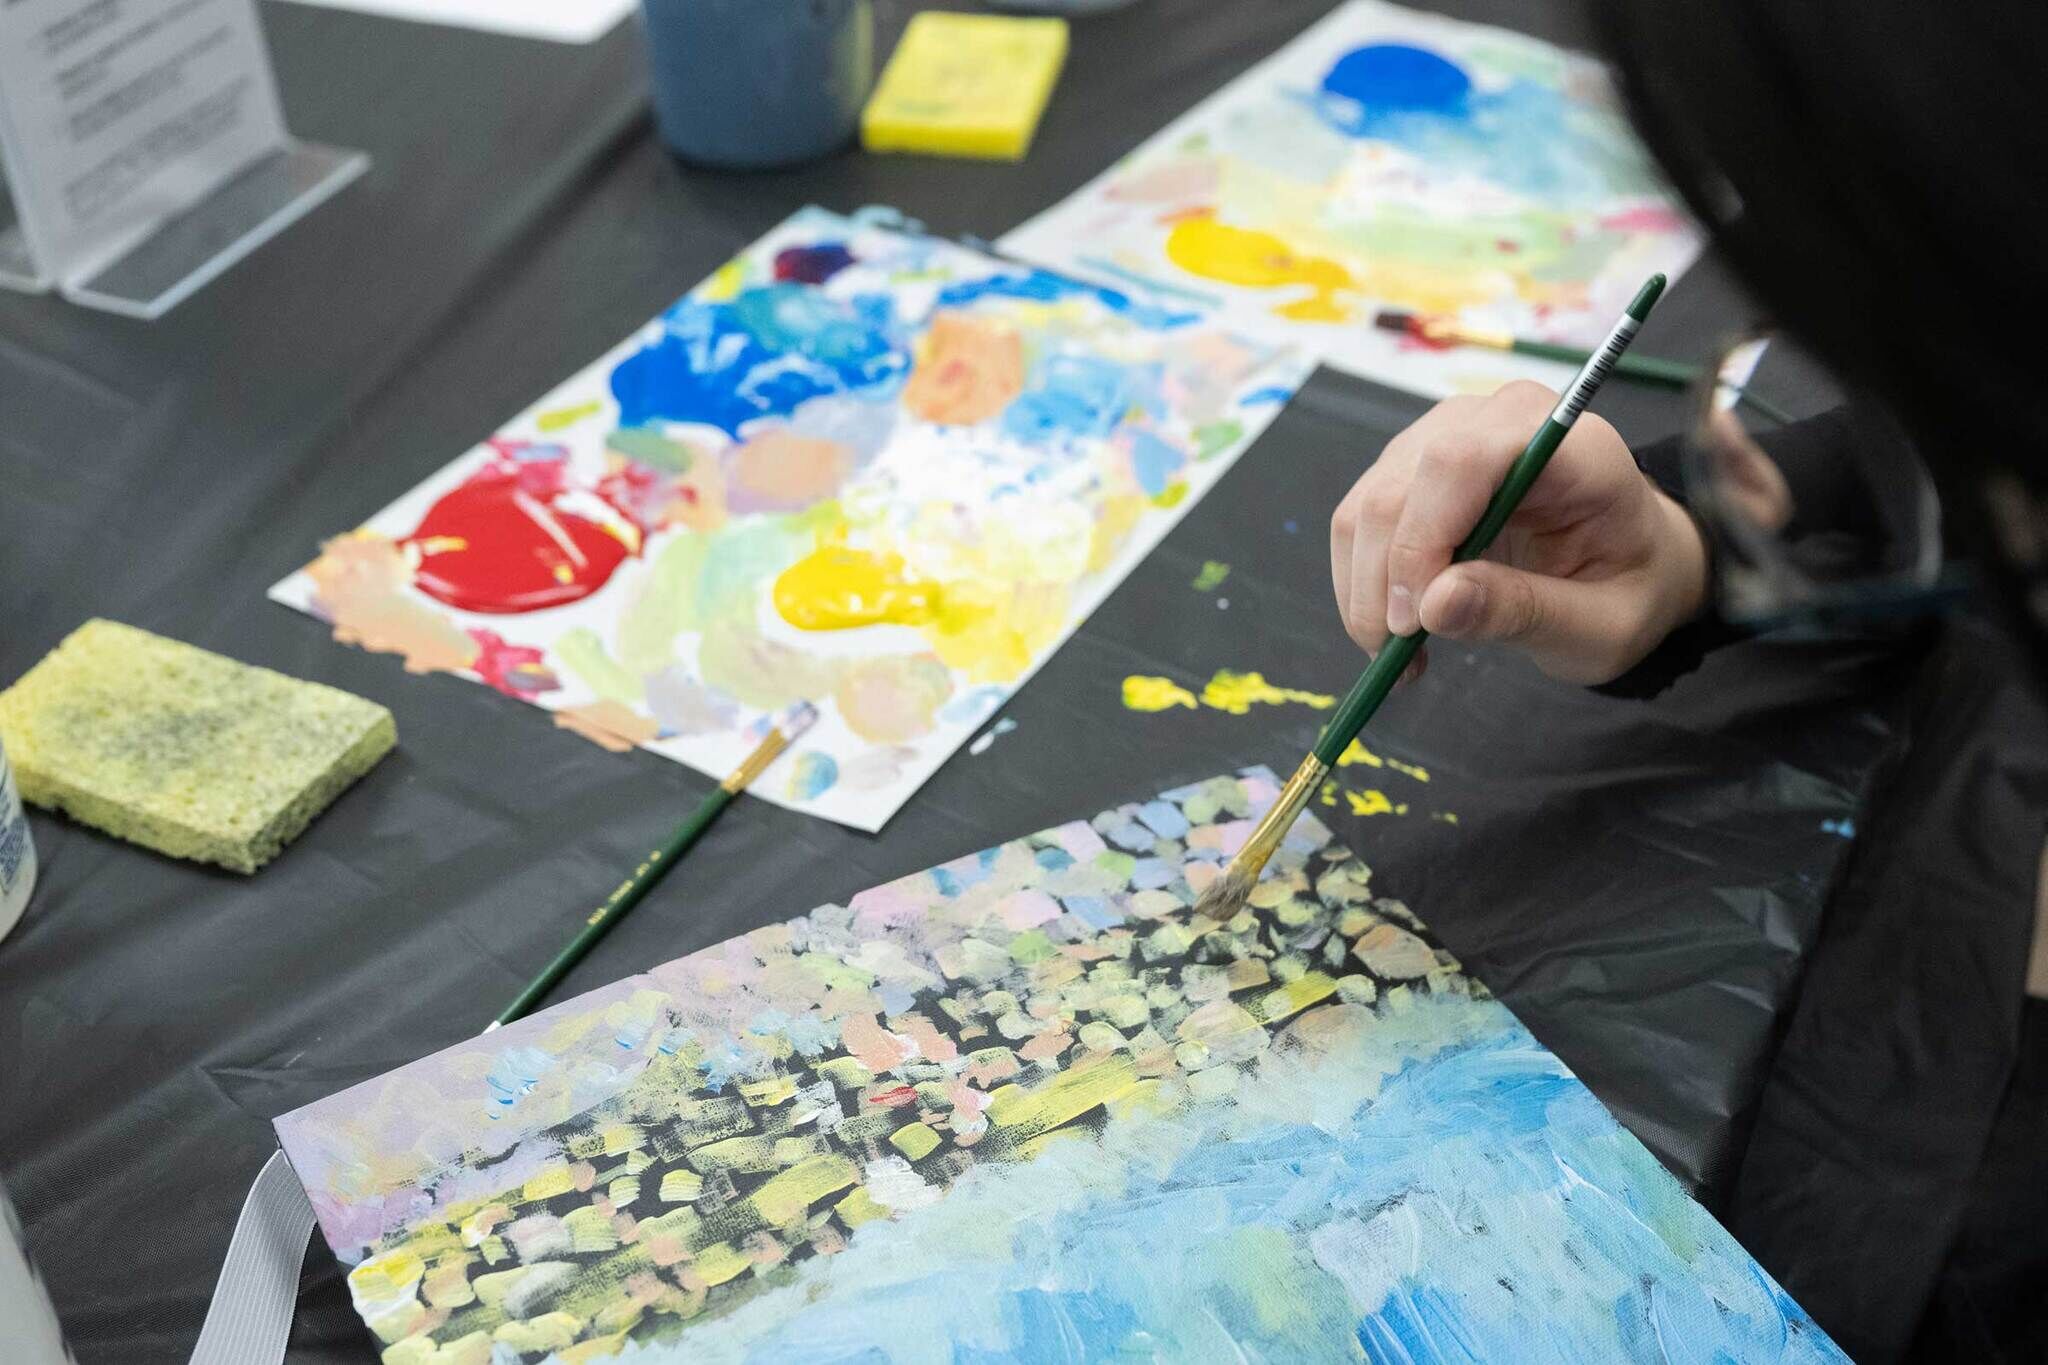 Teen paints with colorful, jagged, and uneven brushstrokes on a canvas board.